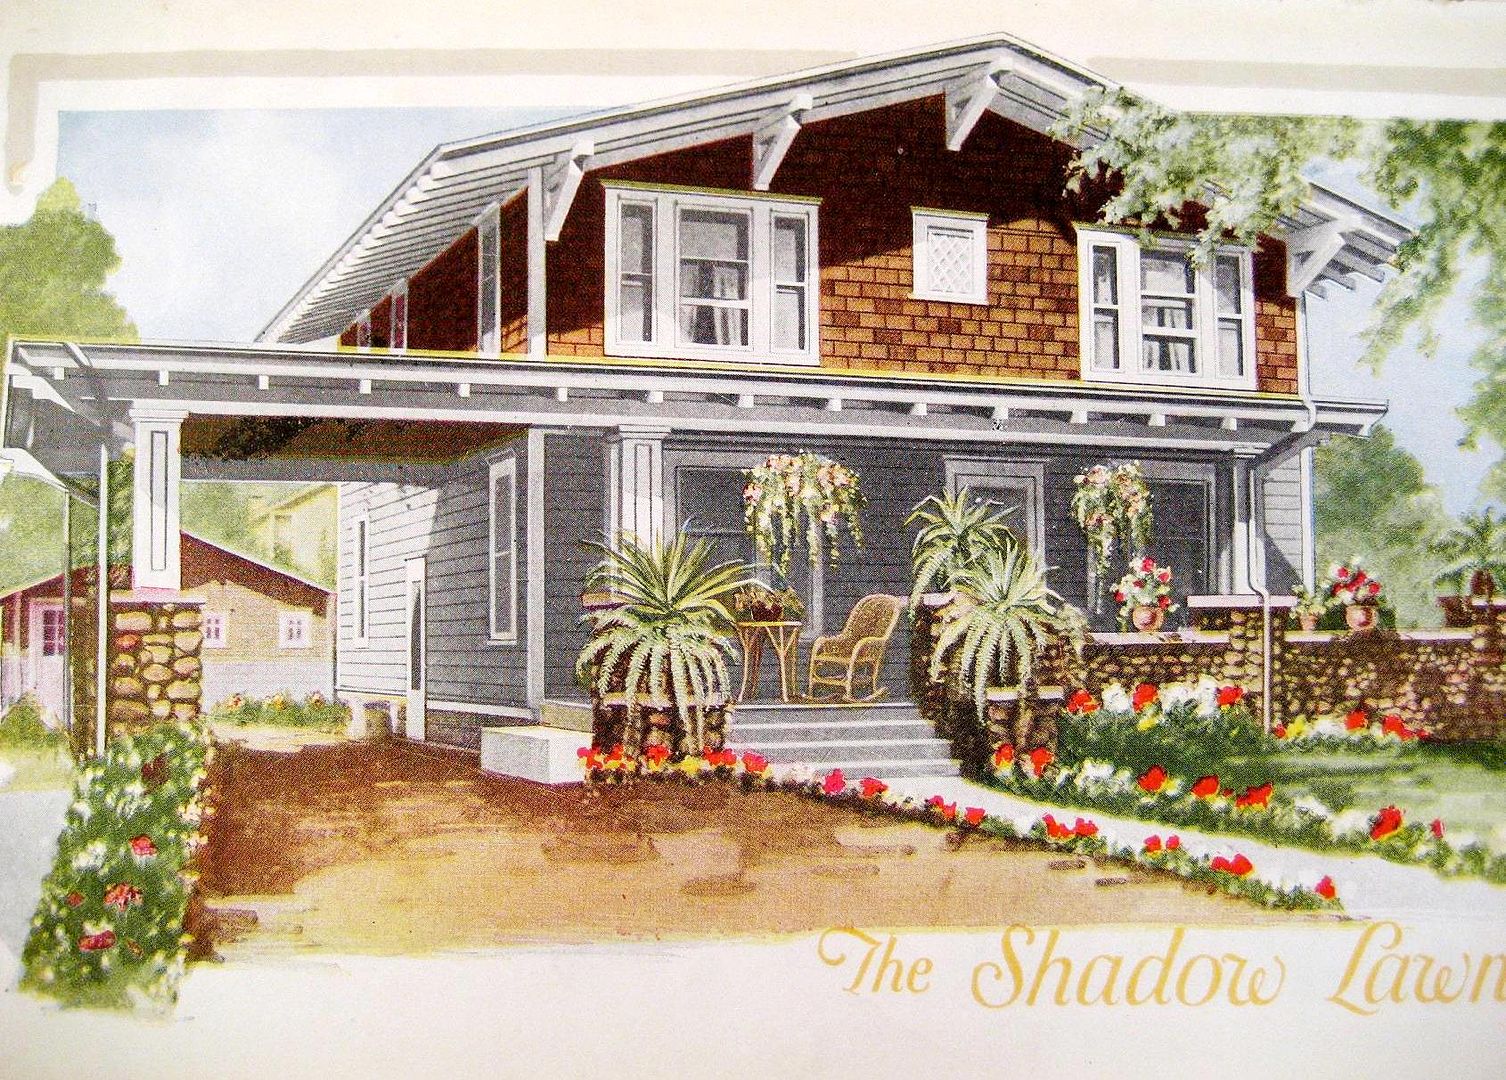 Oh my stars, its a perfect match to the Shadowlawn as shown in the 1919 catalog! Now thats a nice match!!!